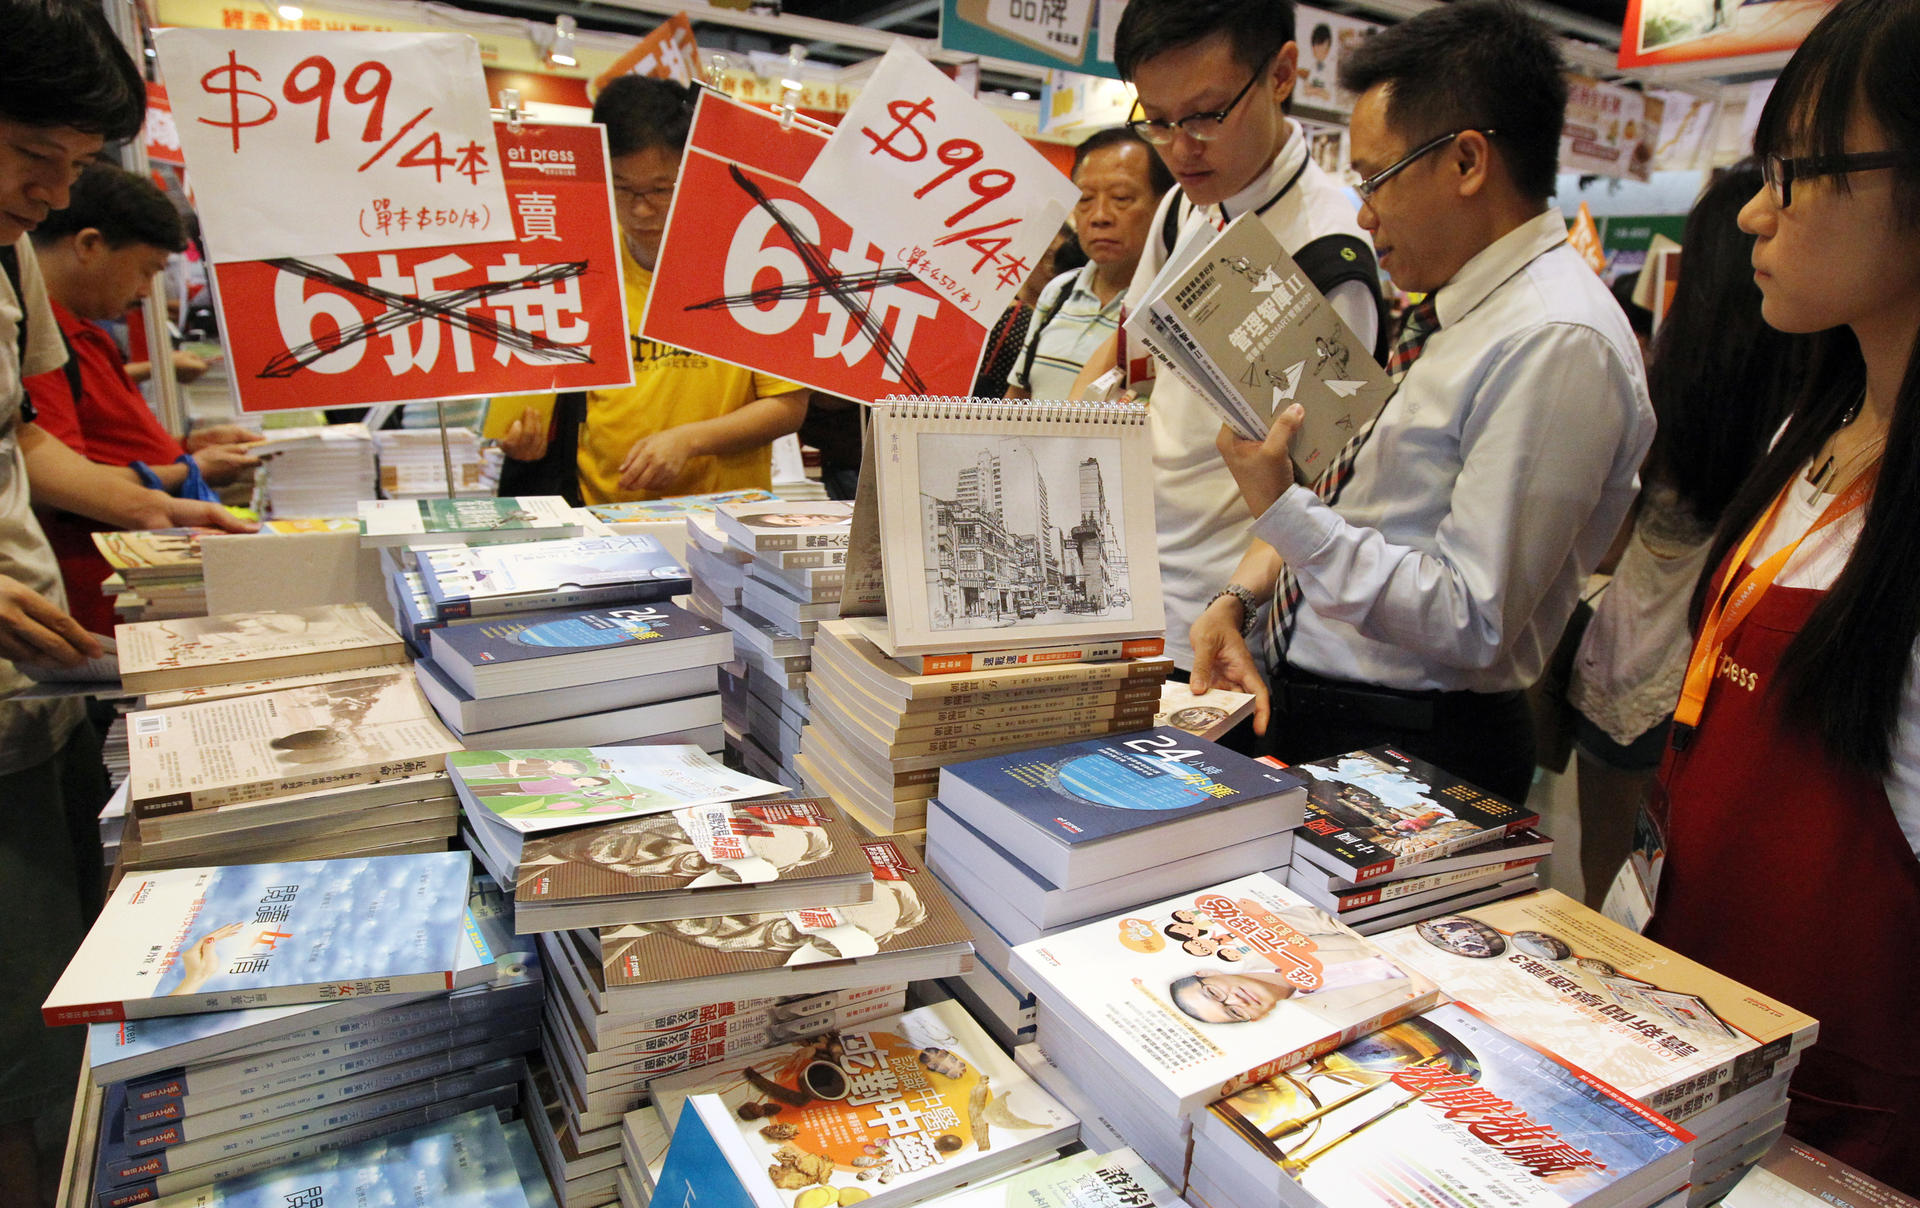 Visitors scour the tables for last-day bargains. Photo: Dickson Lee